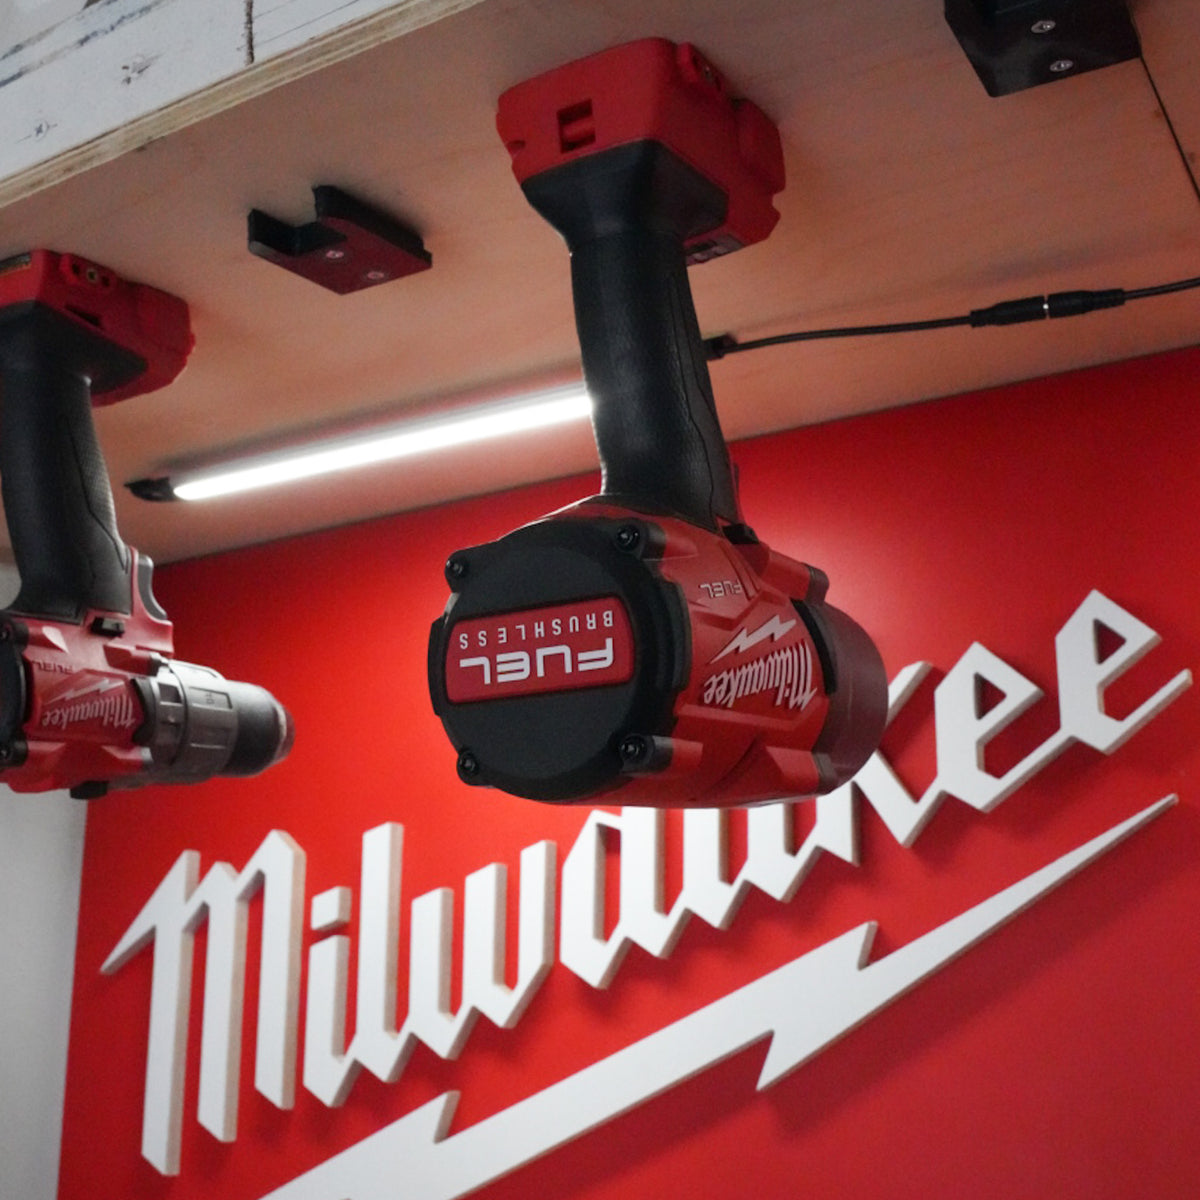 why is milwaukee tools so expensive?